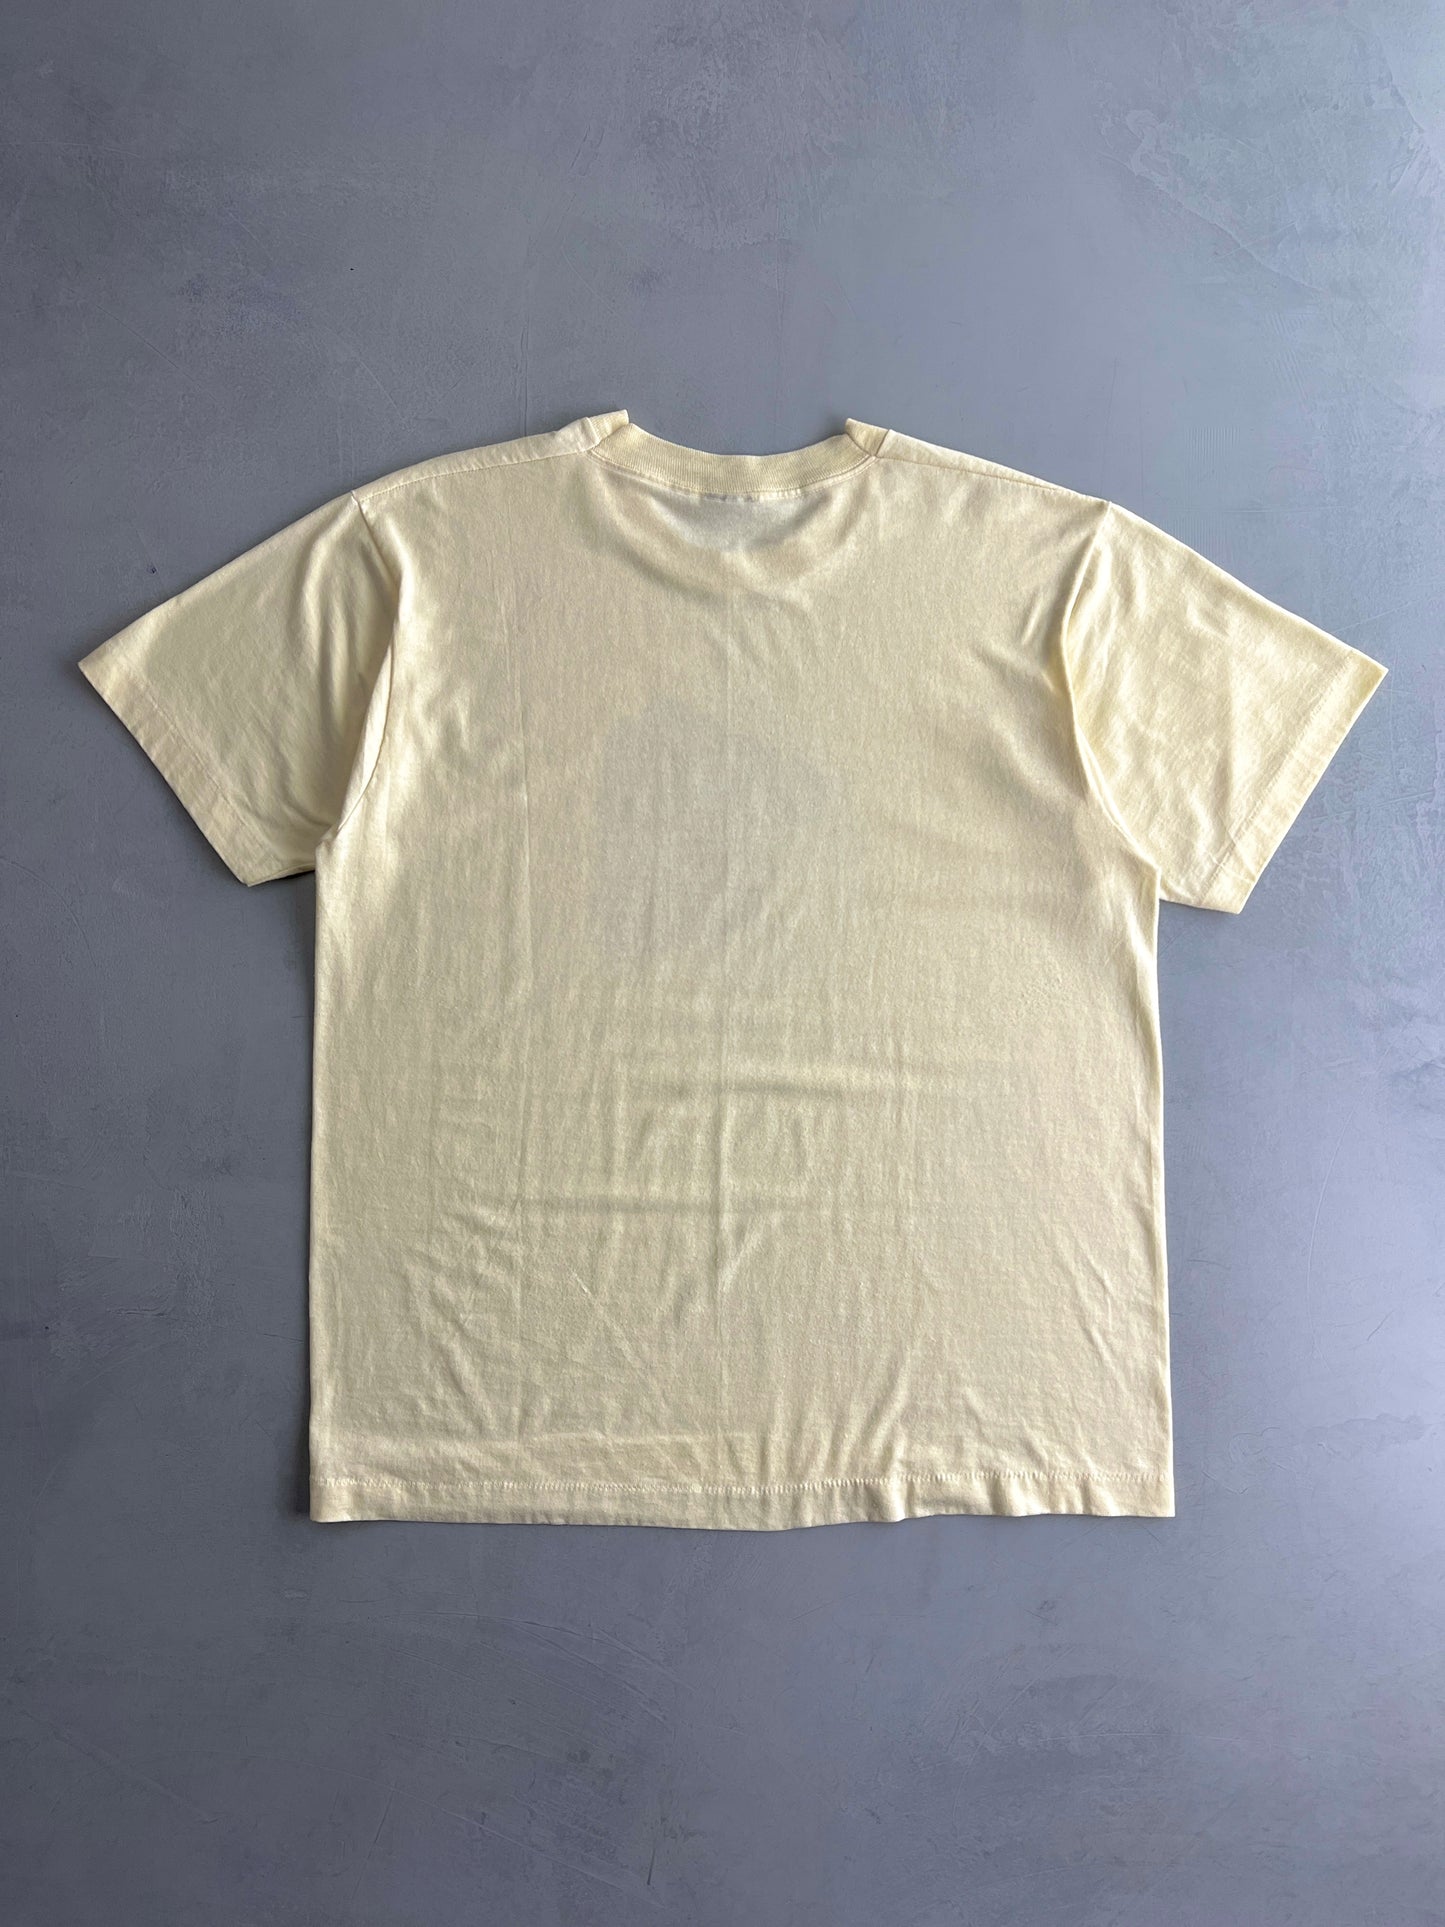 80's "Be More Explicit" Tee [XL]